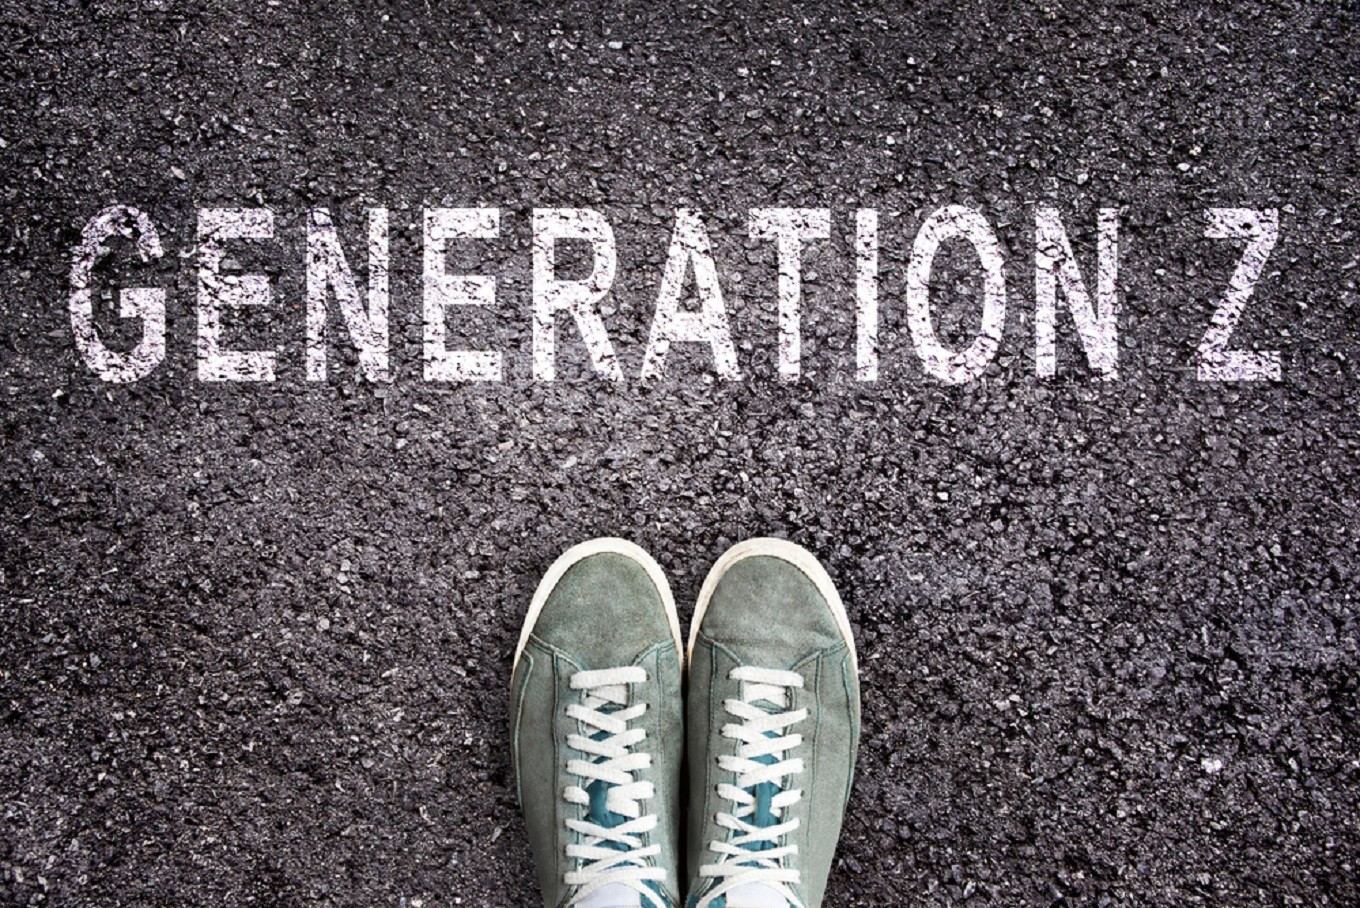 Millennials and Gen Z are increasingly pessimistic about their lives, survey finds